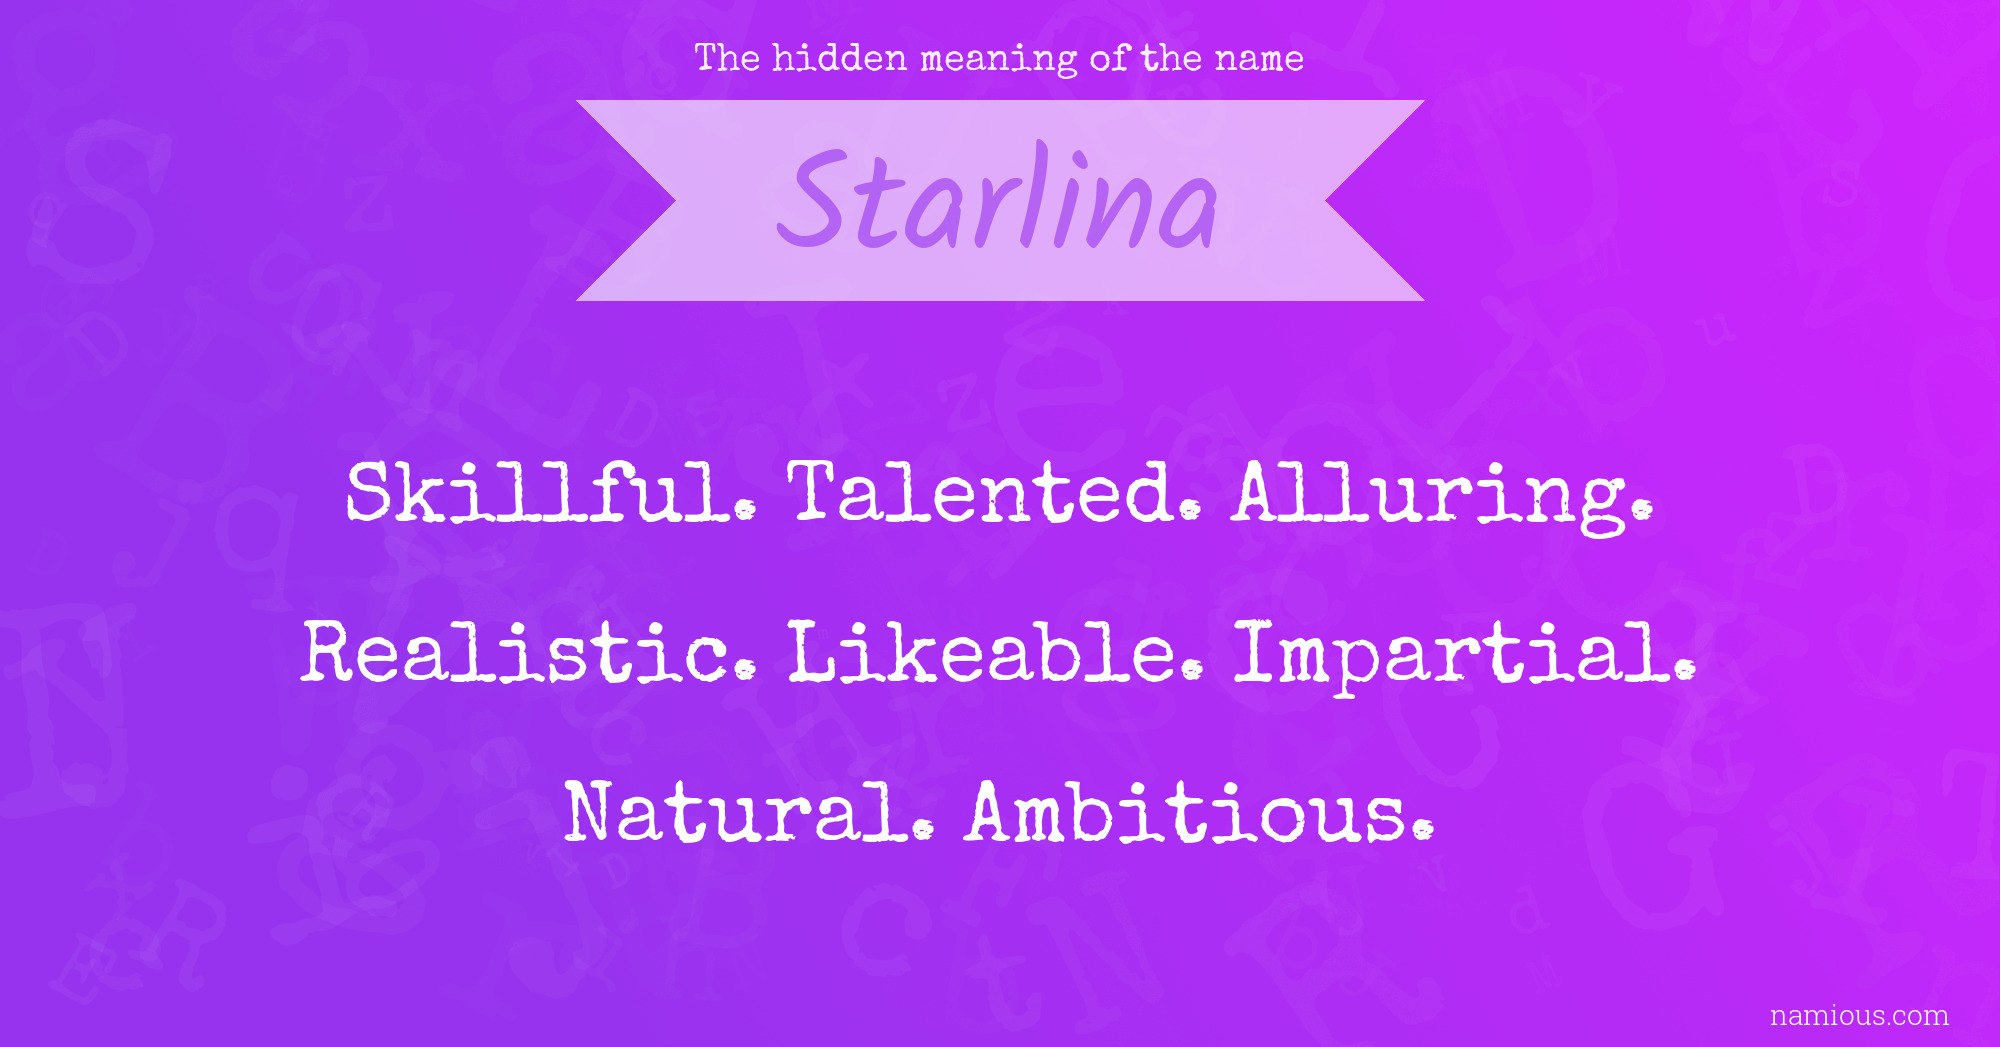 The hidden meaning of the name Starlina